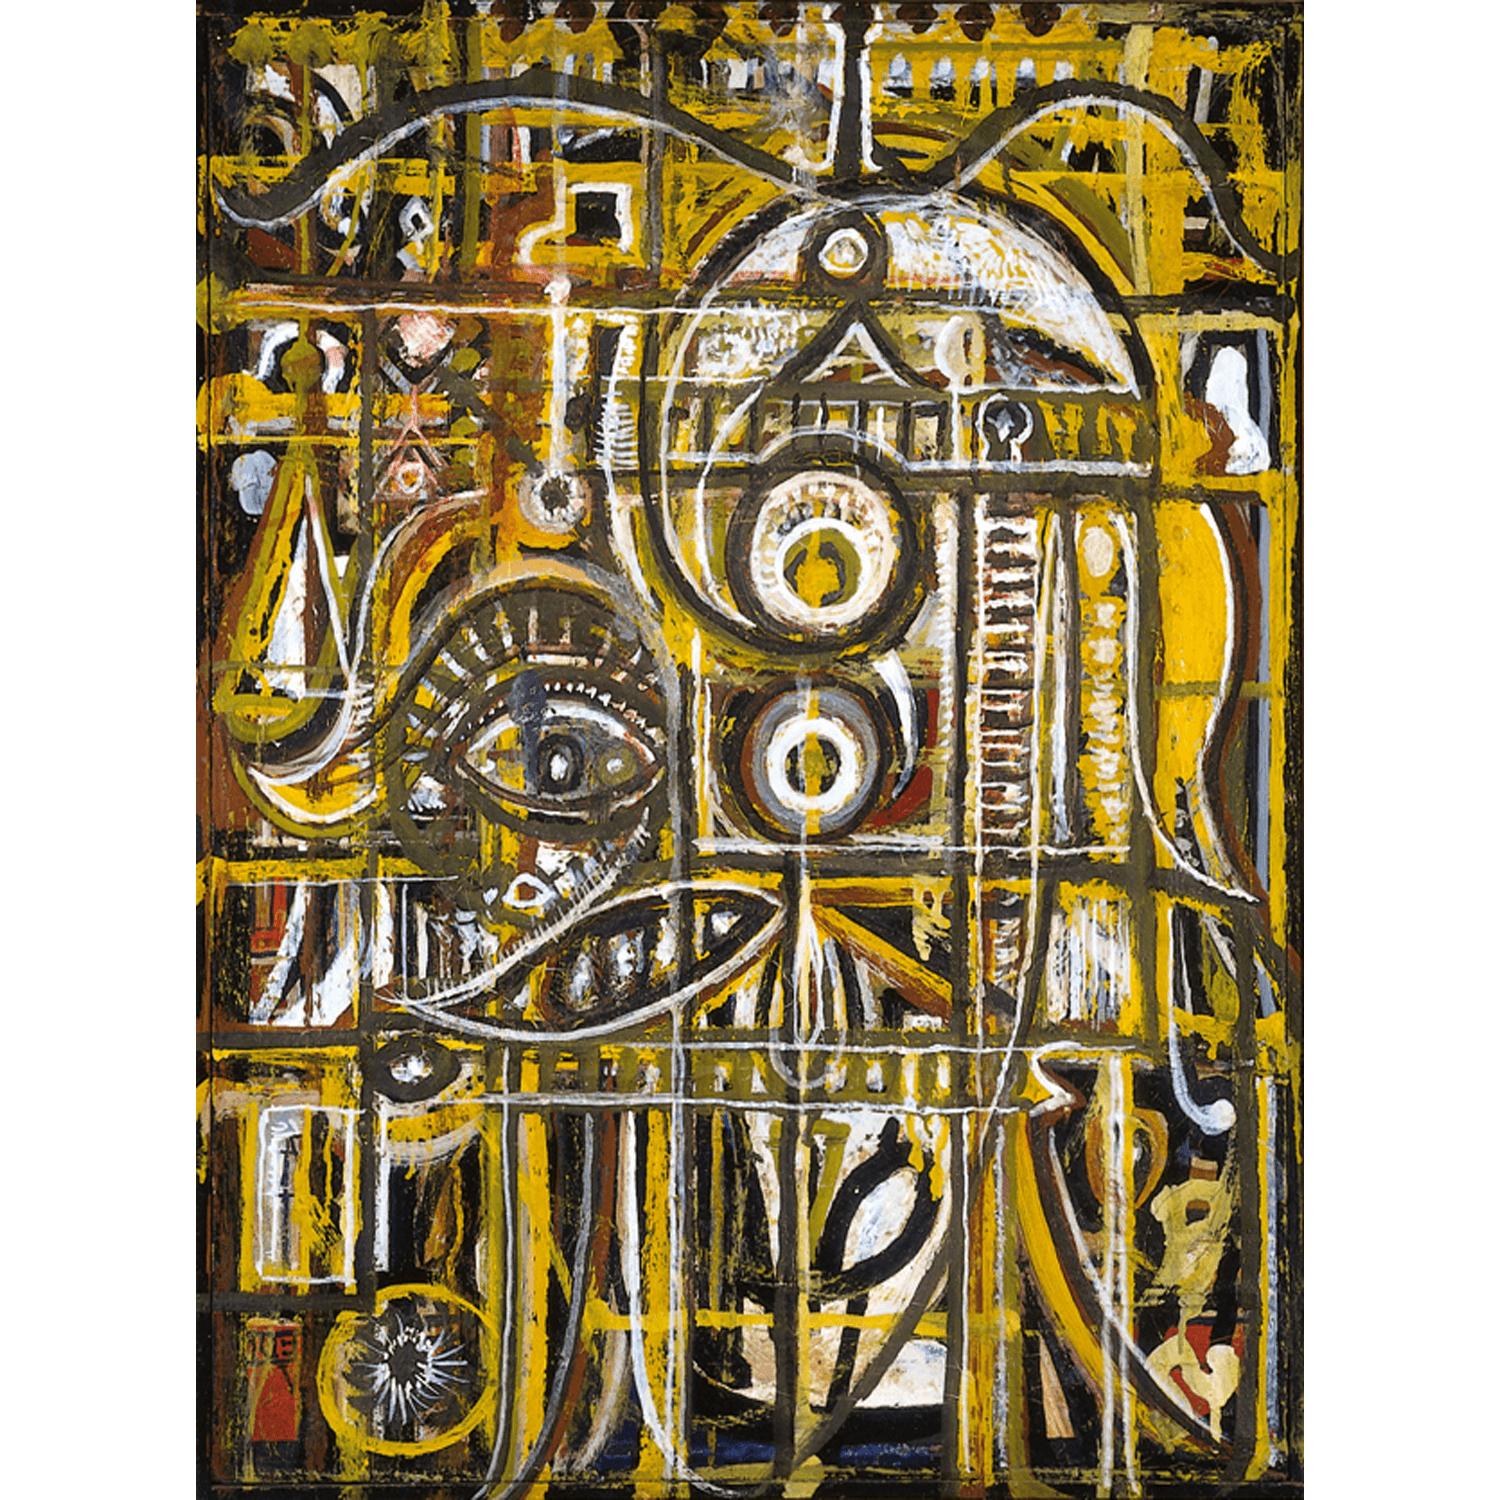 RICHARD POUSETTE-DART: PAINTINGS AND DRAWINGS FROM THE 1930s AND 1940s ...